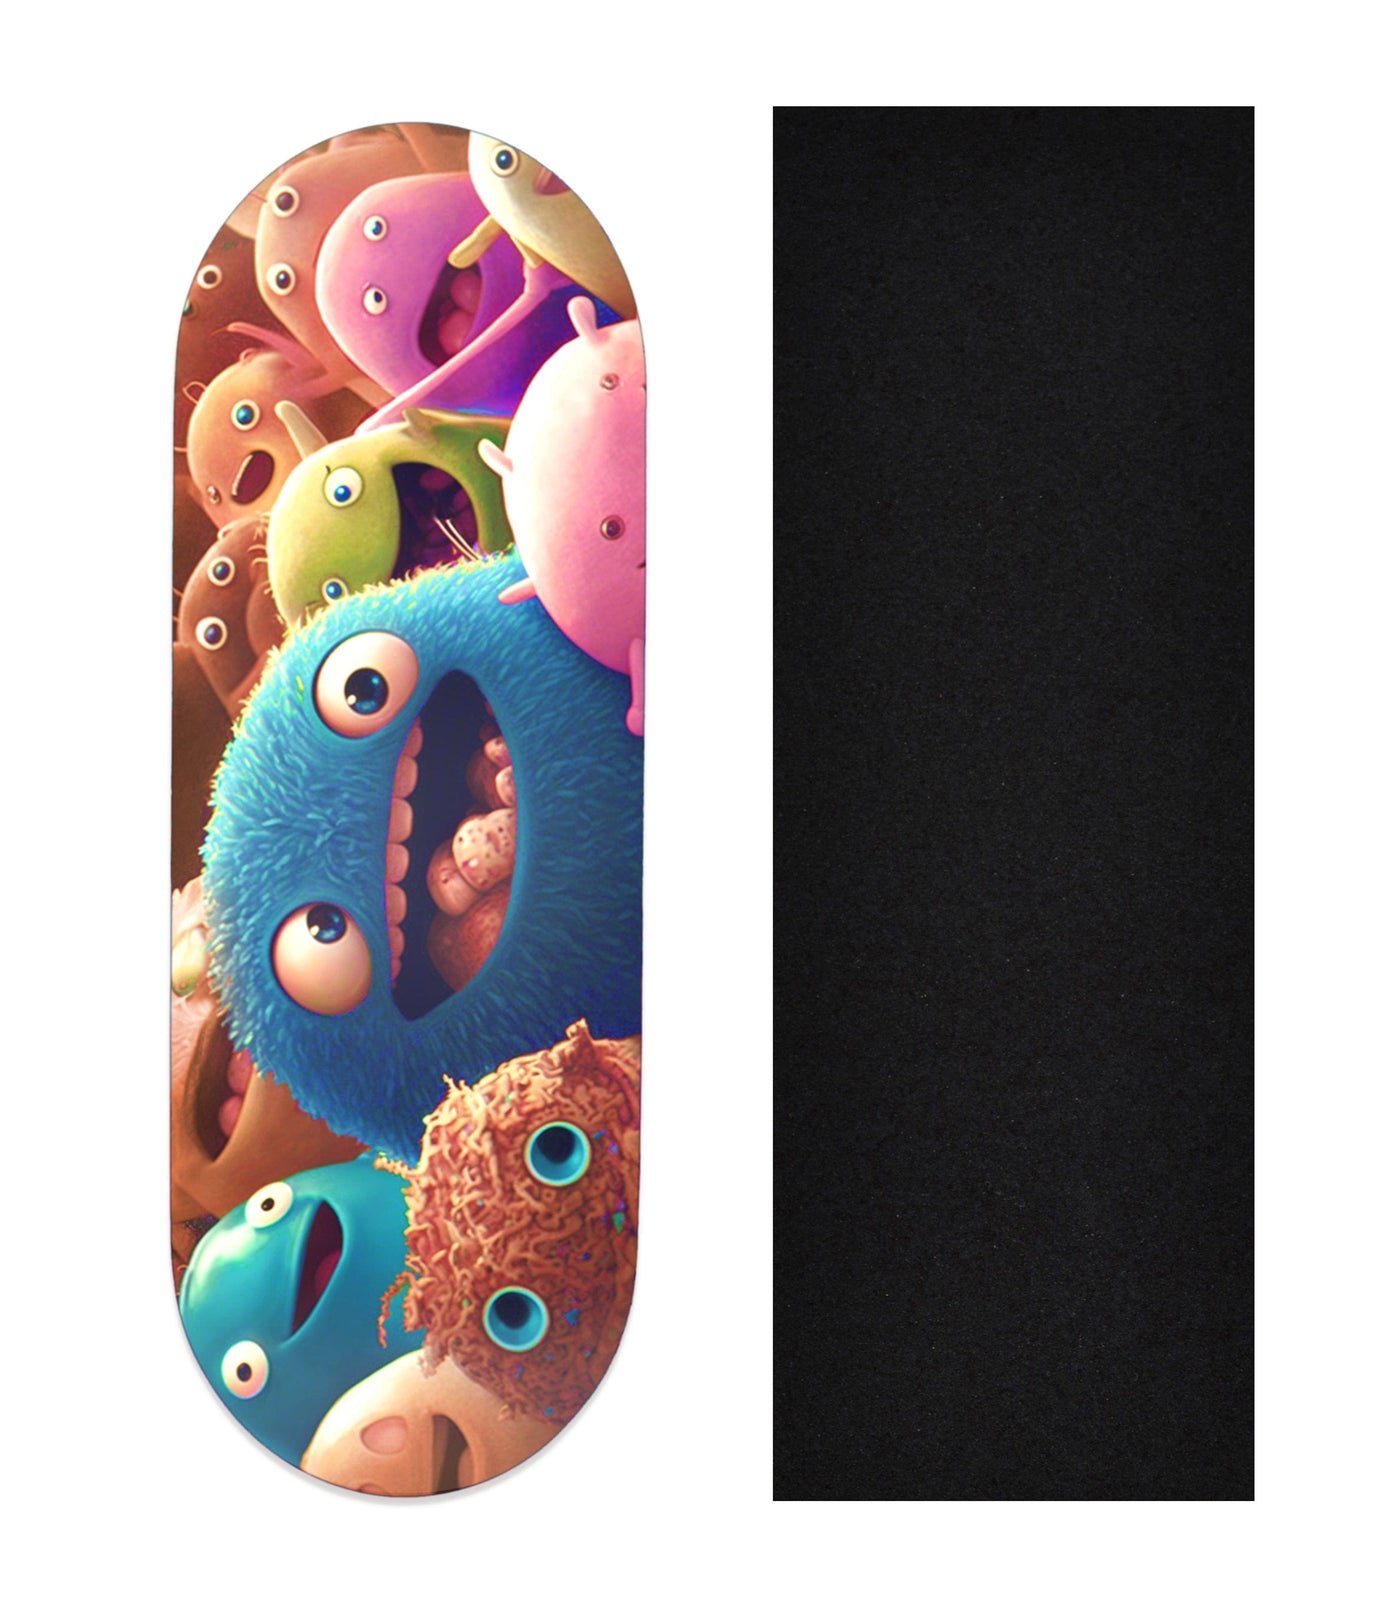 Teak Tuning Heat Transfer Graphic Wooden Fingerboard Deck, "Eager Microbes" 32mm Deck